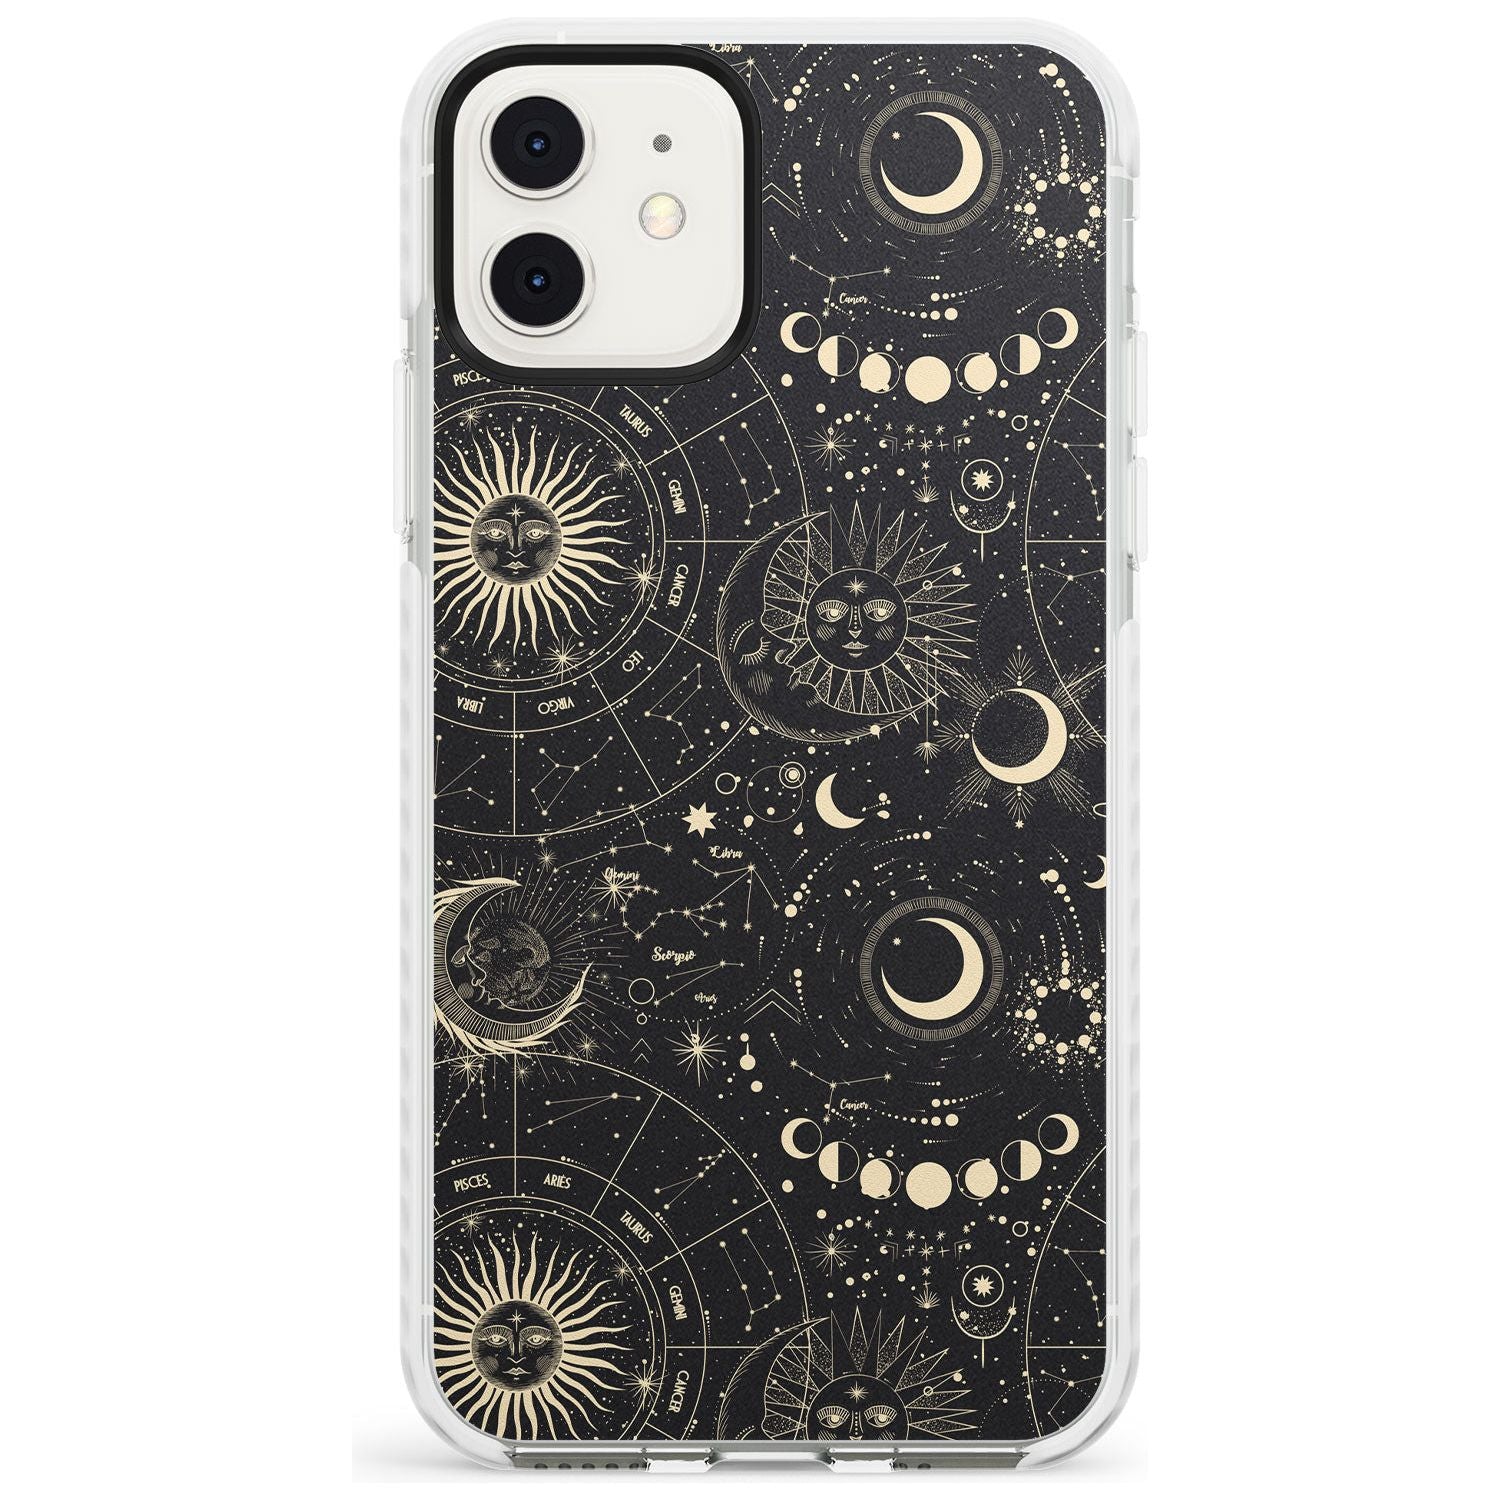 Suns, Moons & Star Signs Slim TPU Phone Case for iPhone 11